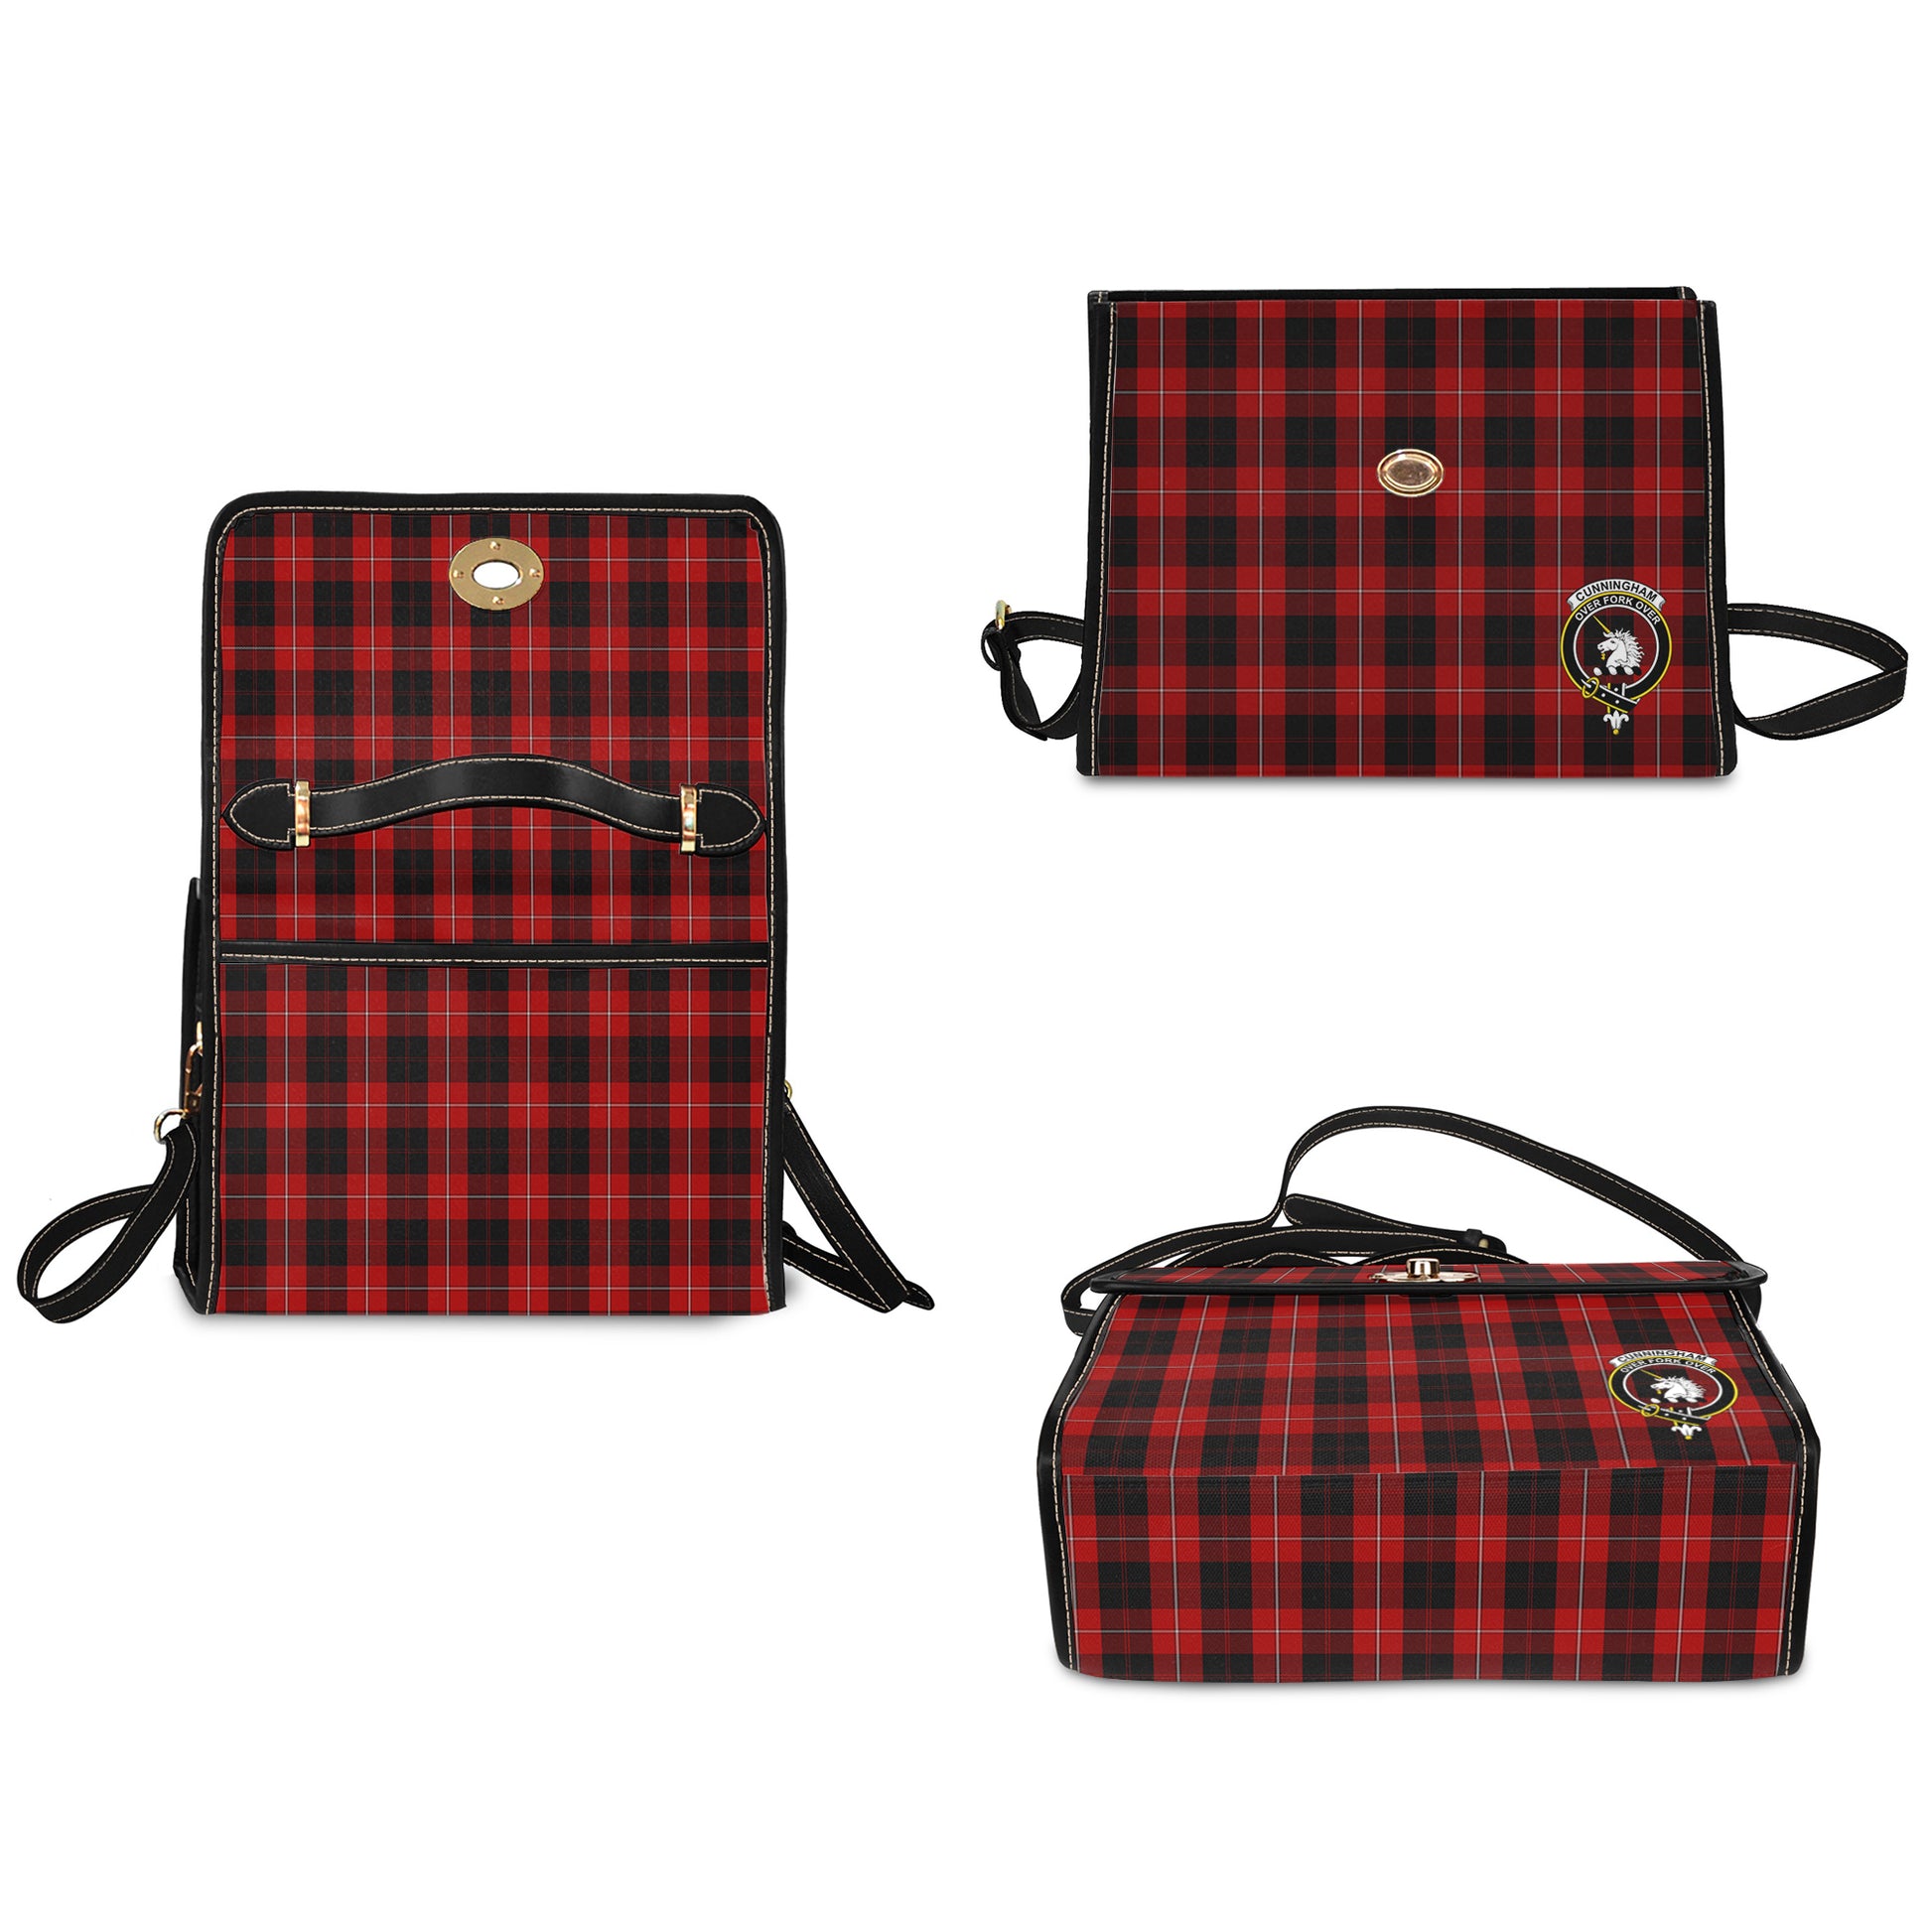 cunningham-tartan-leather-strap-waterproof-canvas-bag-with-family-crest